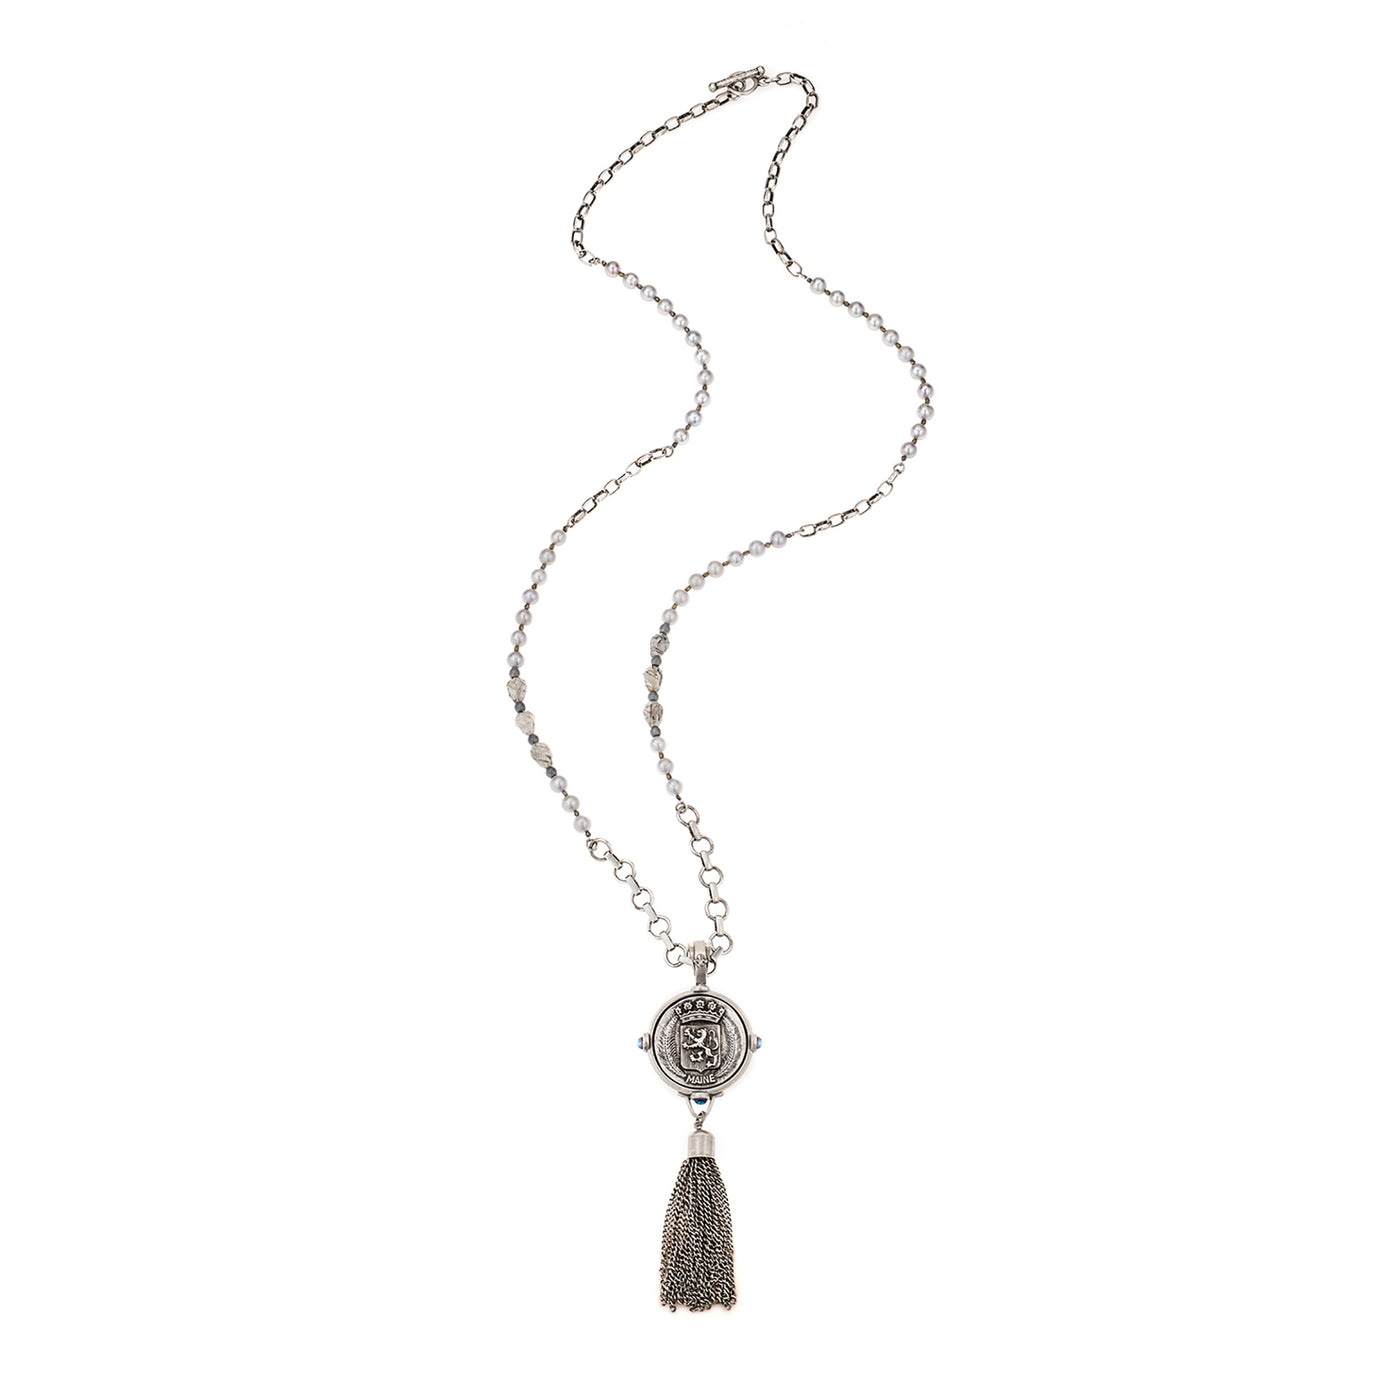 38" Silver Freshwater Pearl & Labradorite Necklace with Silver Medallion and Tassel